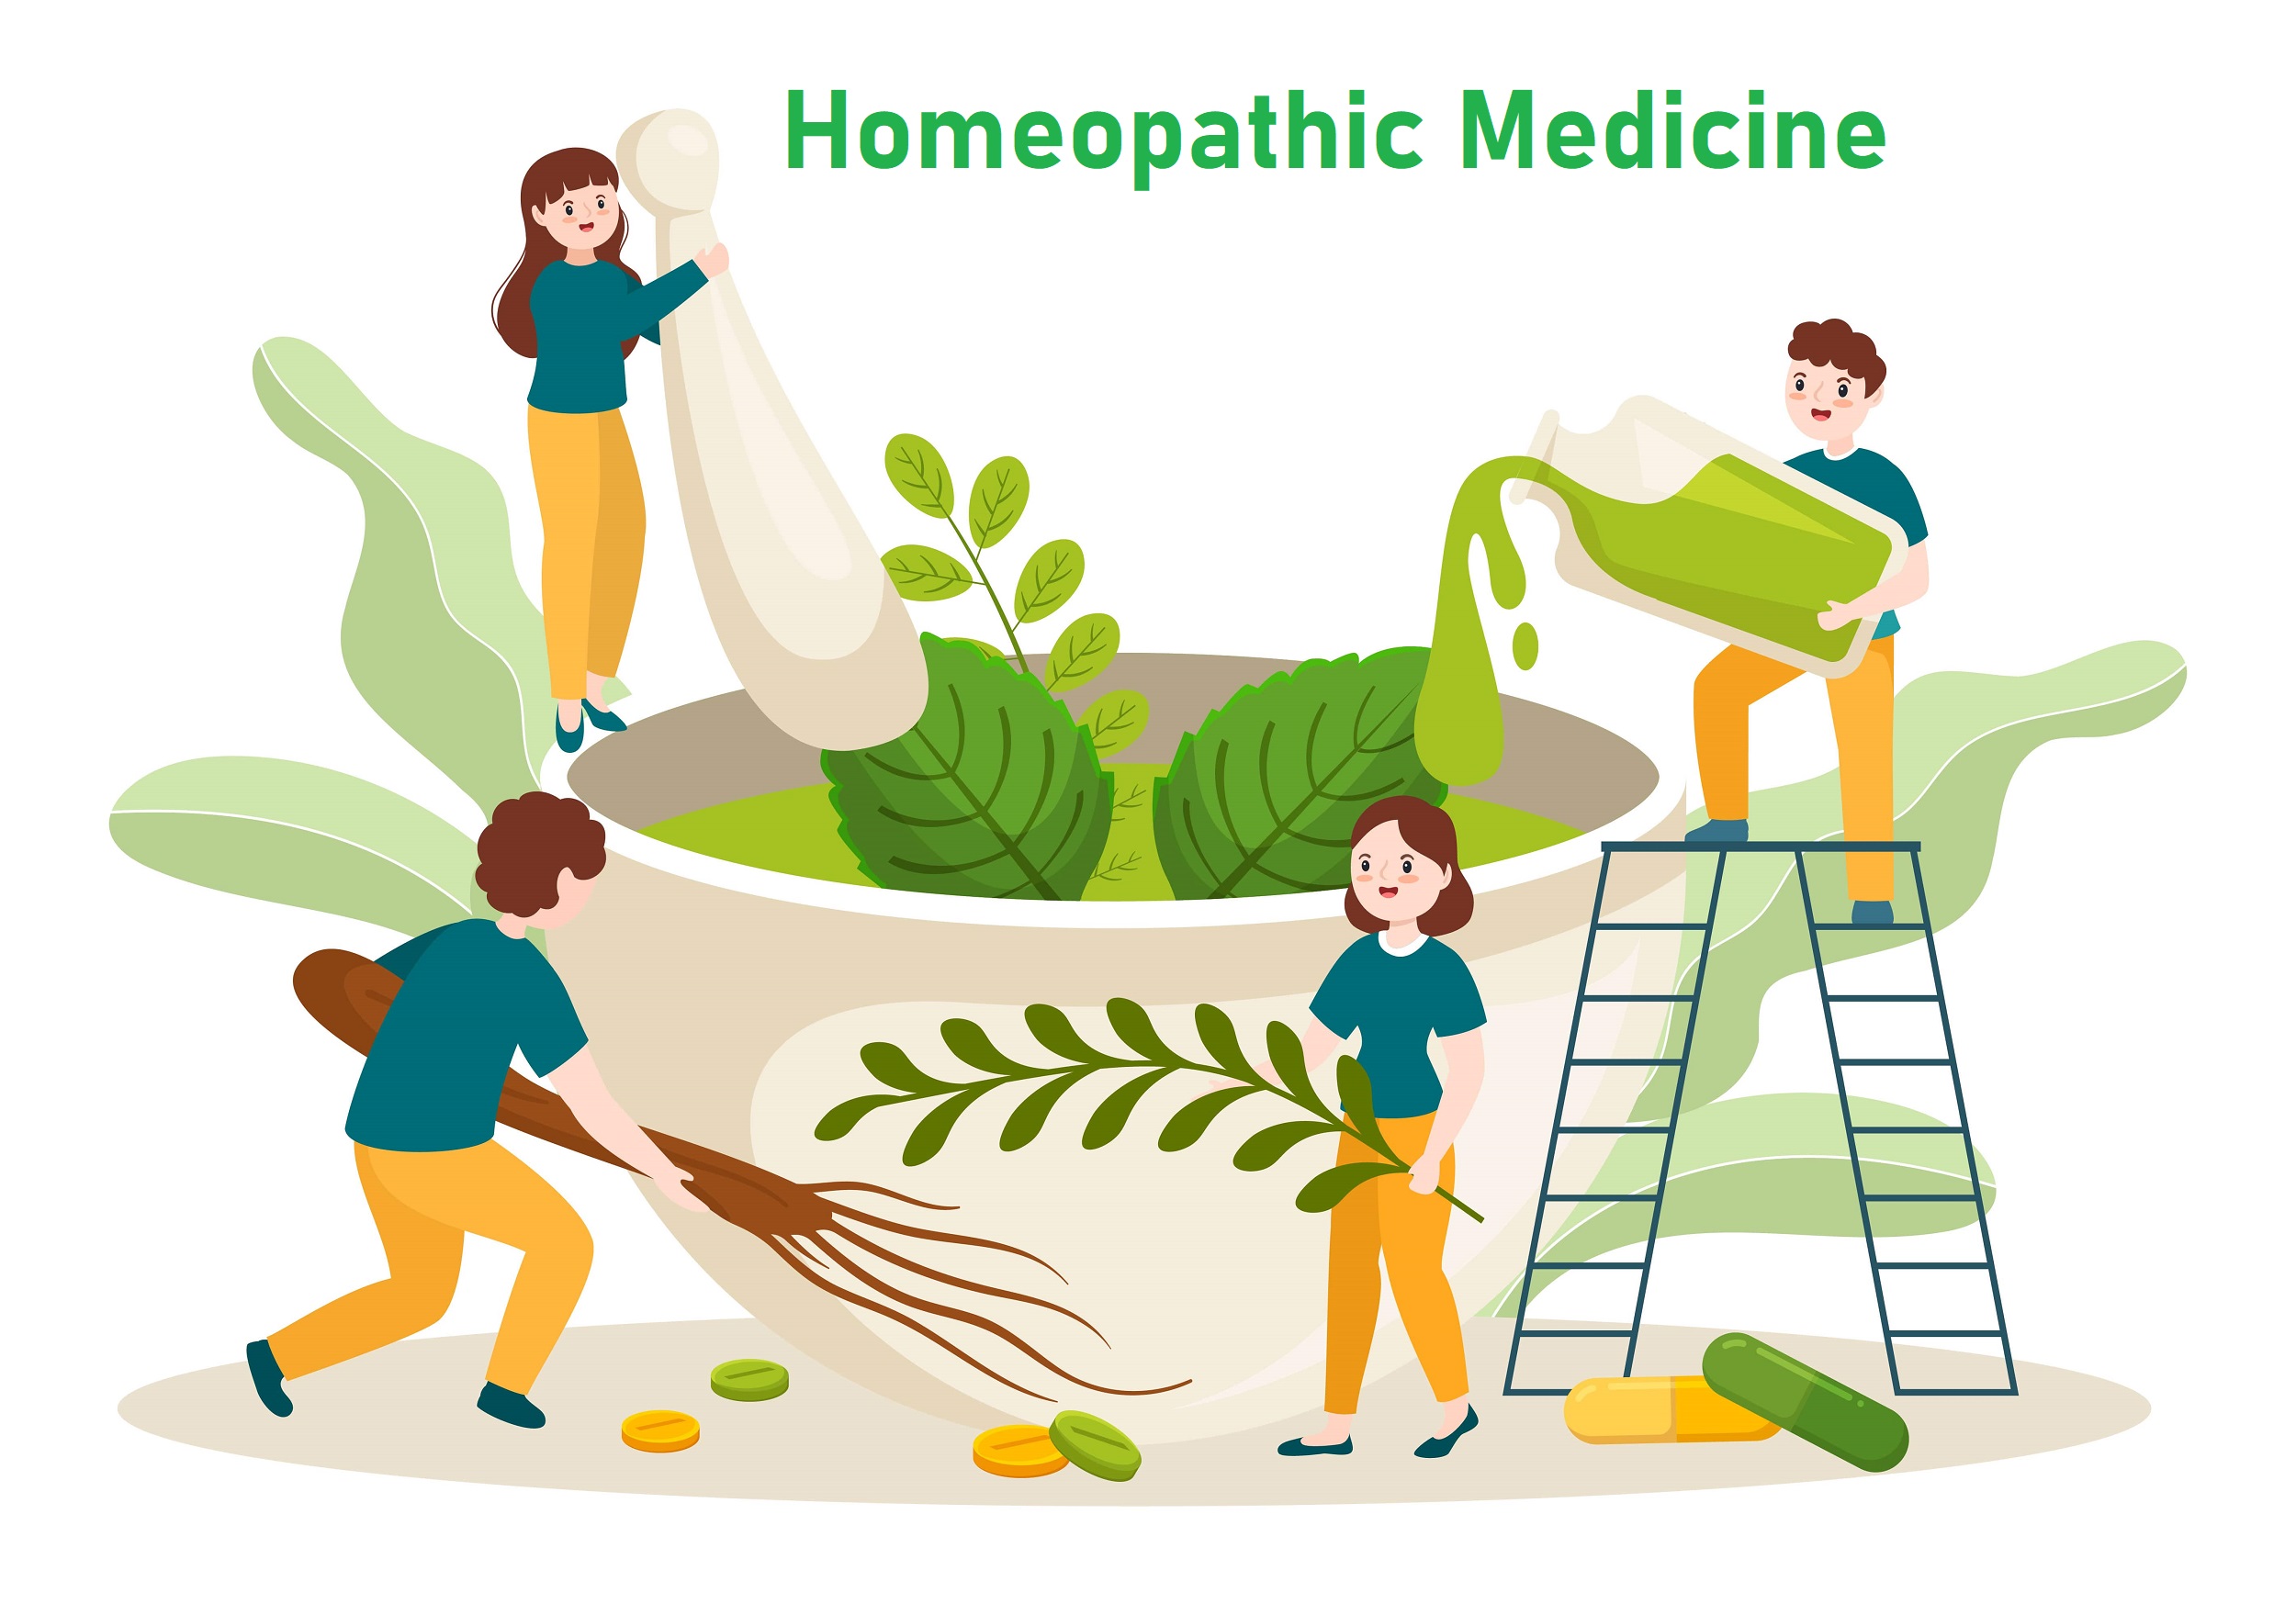 Homeopathic Medicine Market Share Multiply Relentlessly; Asserts MRFR Unleashing Industry Forecast Up To 2032